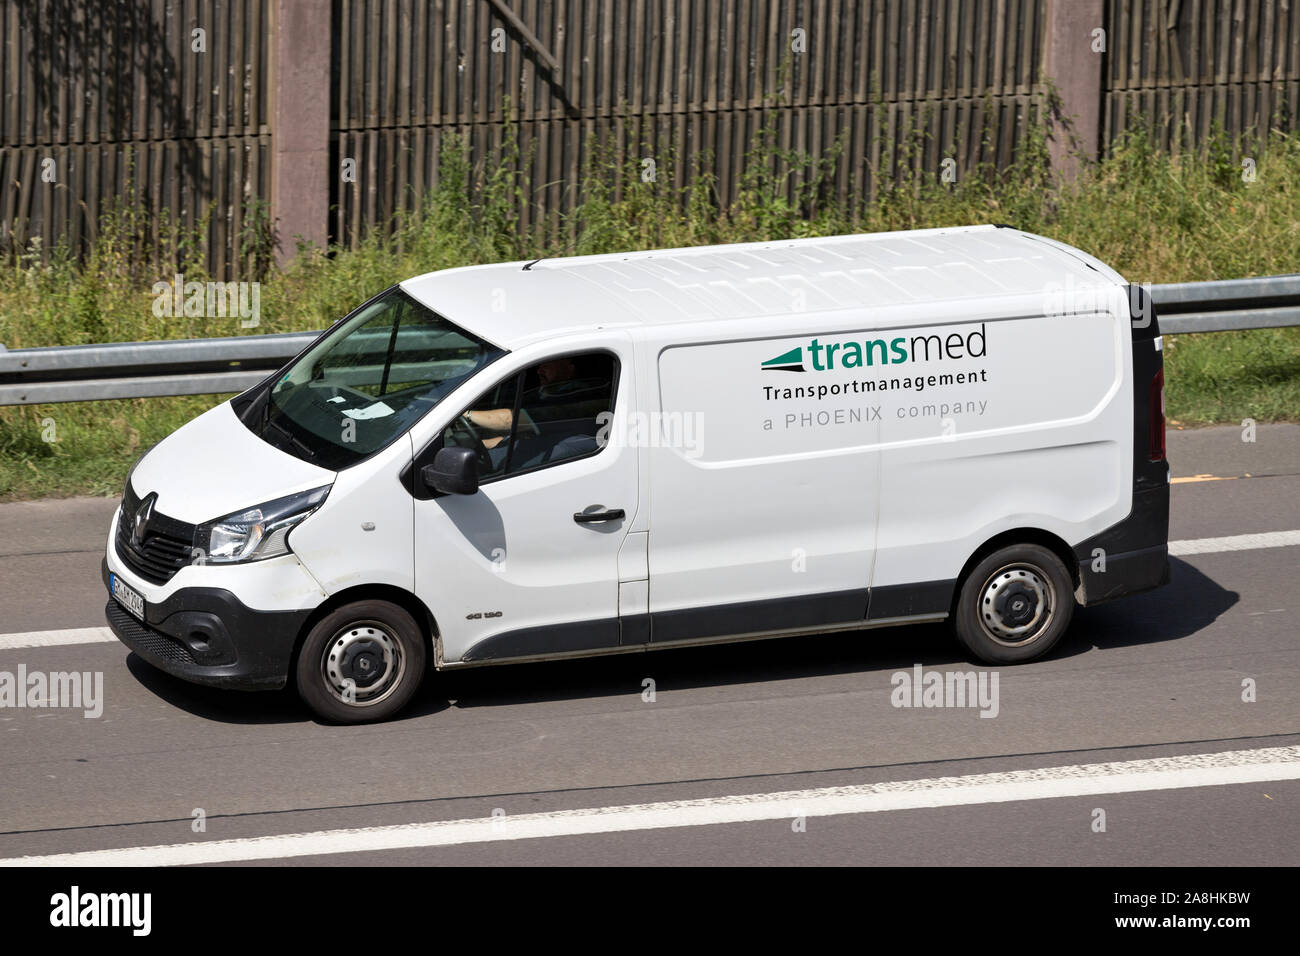 Transmed van on motorway. Transmed was foundet in 1970 and operates more than 3,000 vehicles, including 350 PharmaMobiles. Stock Photo